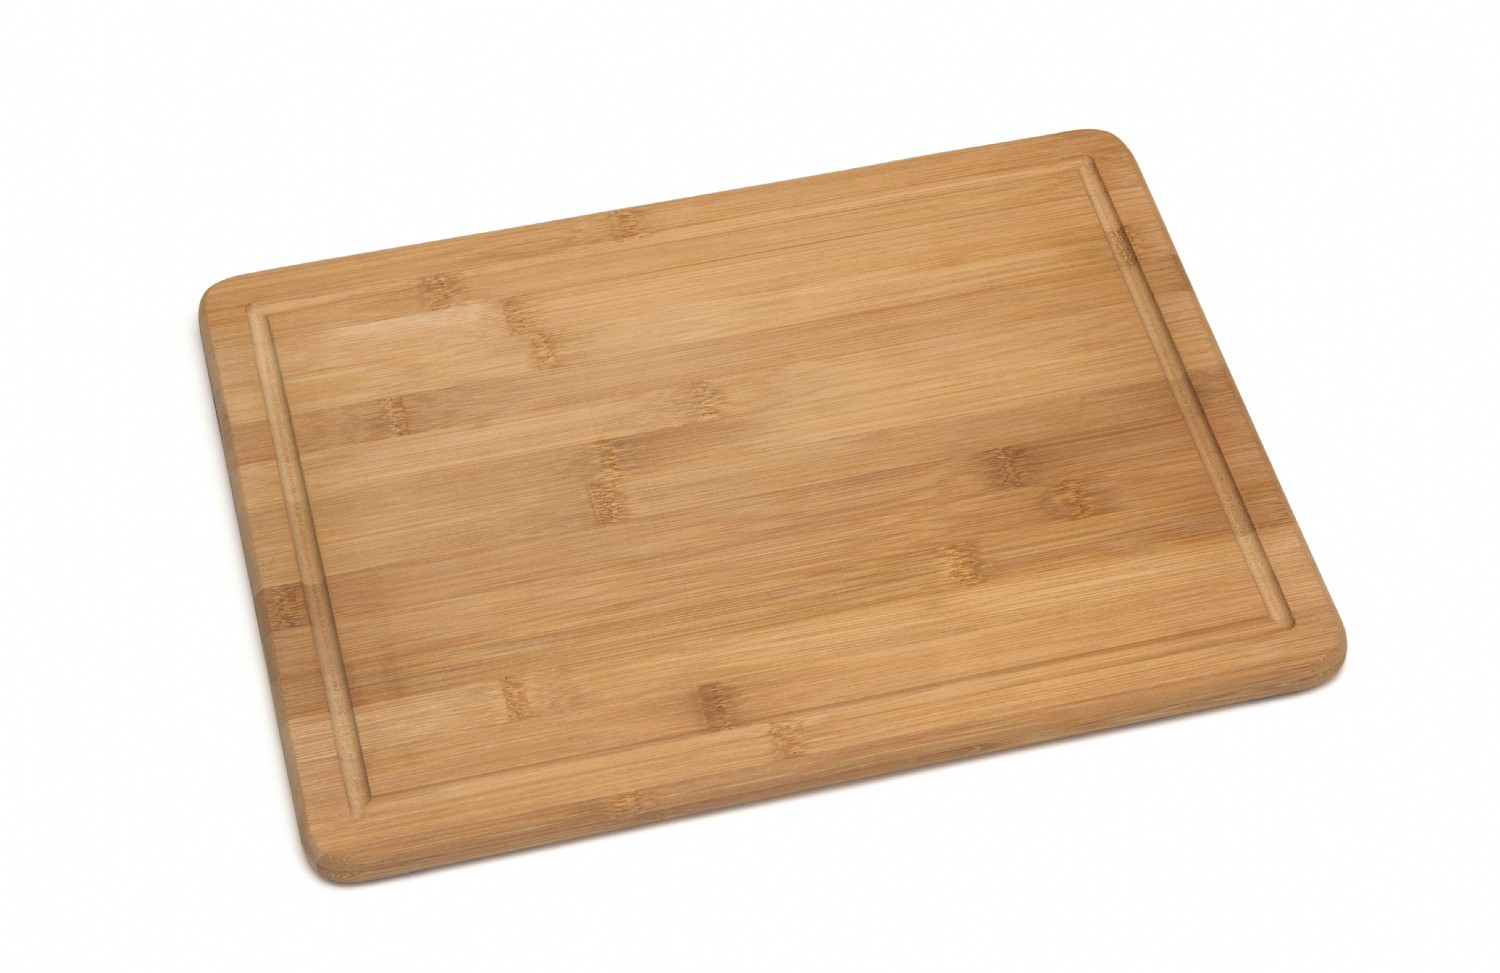  Lipper International Bamboo Wood Thin Kitchen Cutting Boards  with Oval Hole in Corner, Set of 2 Boards, 6 x 8 x 0.25 : Wood Cutting  Board : Home & Kitchen